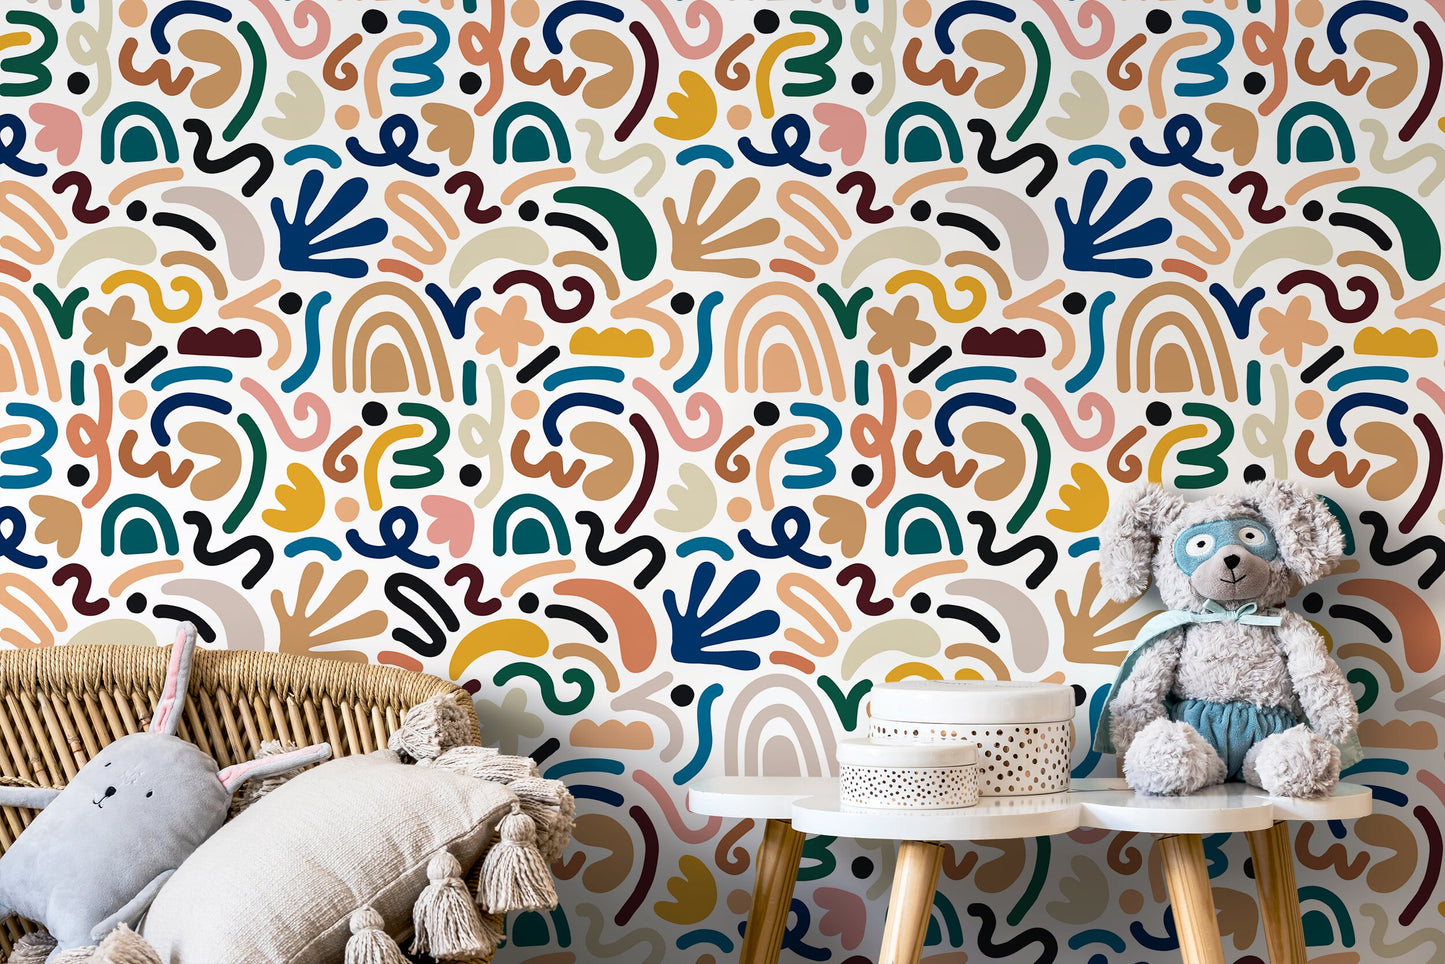 Colorful Matisse Style Wallpaper / Peel and Stick Wallpaper Removable Wallpaper Home Decor Wall Art Wall Decor Room Decor - D193